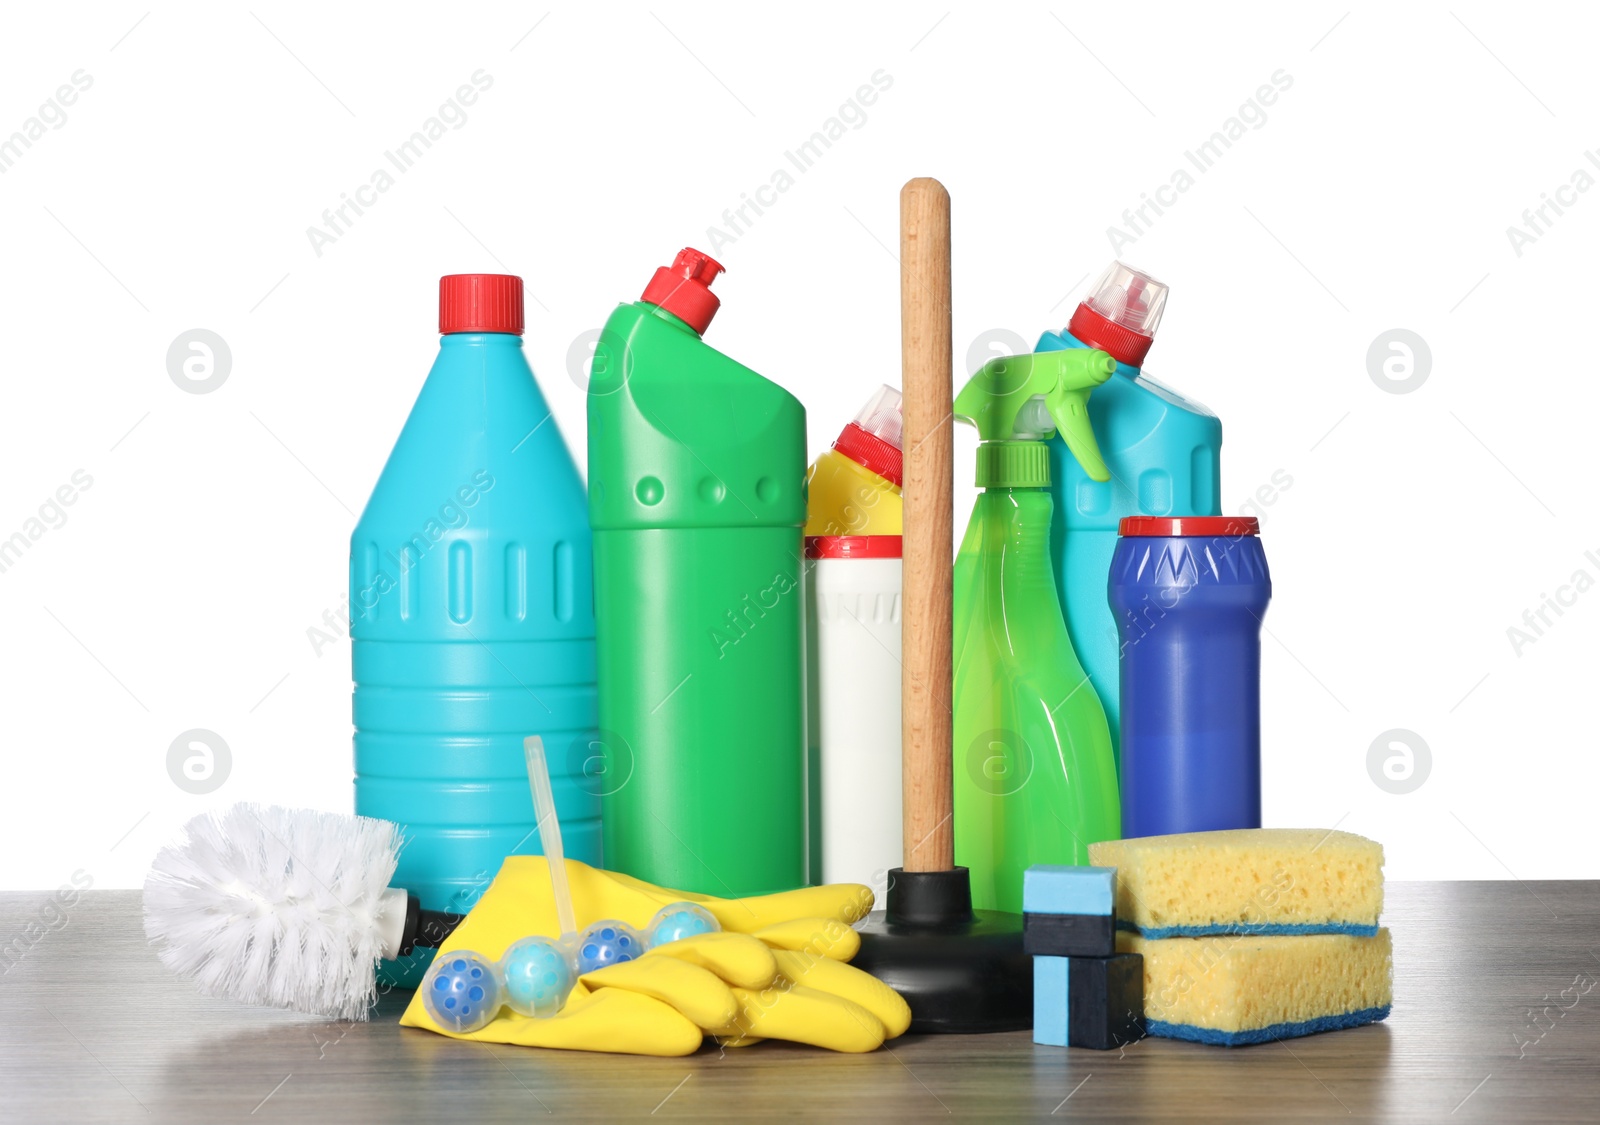 Photo of Different toilet cleaning supplies and tools on wooden table against white background